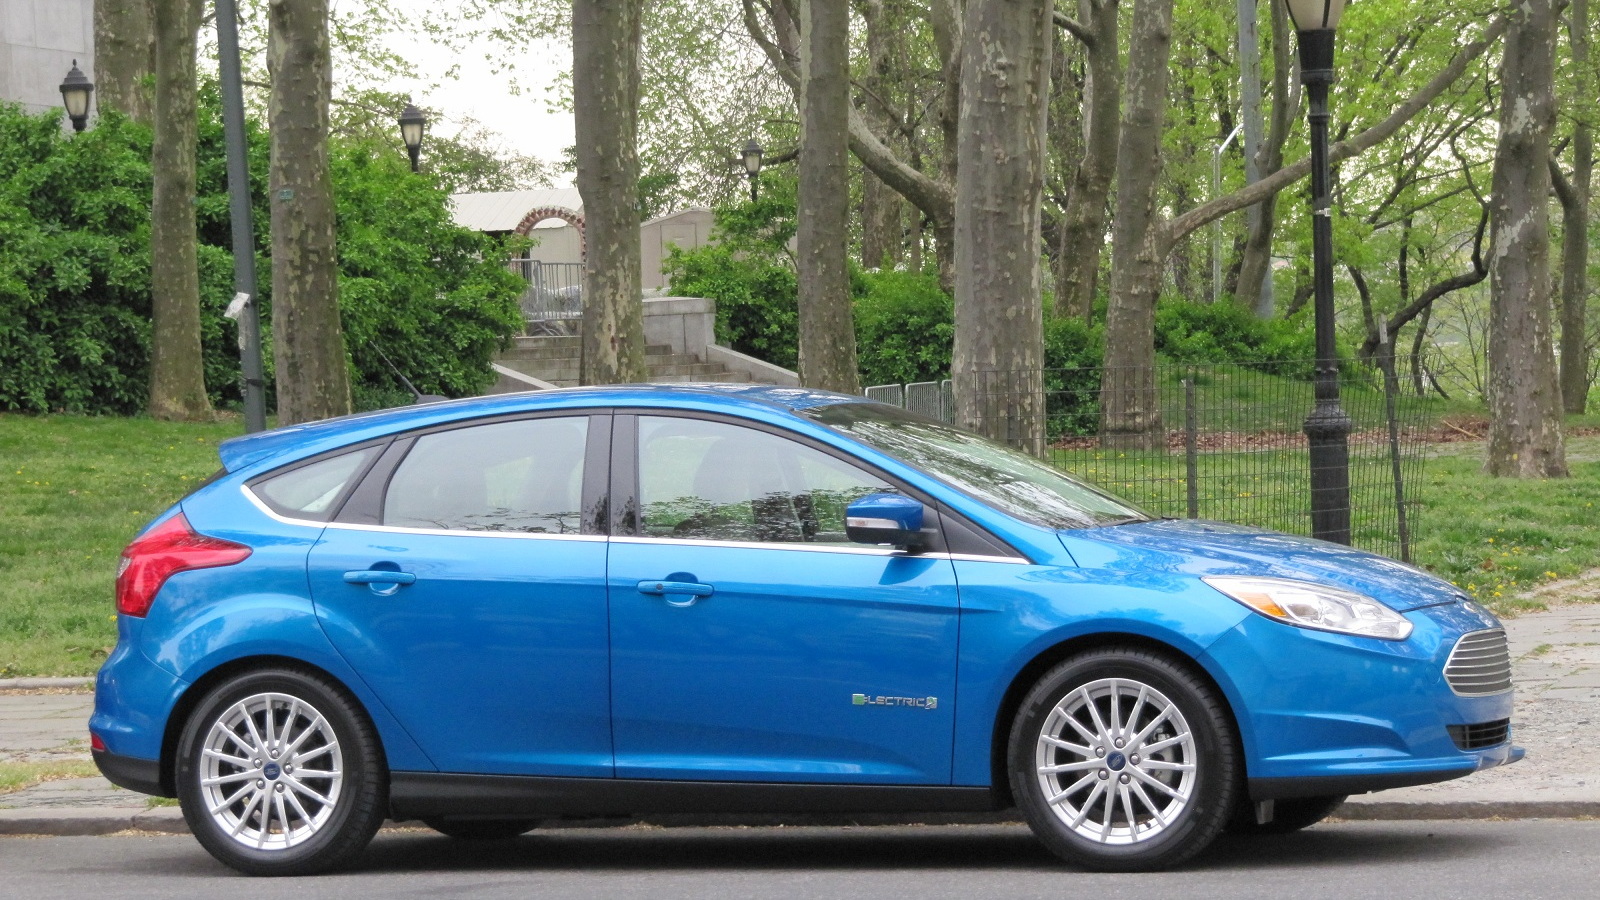 2012 Ford Focus Electric, New York City, April 2012